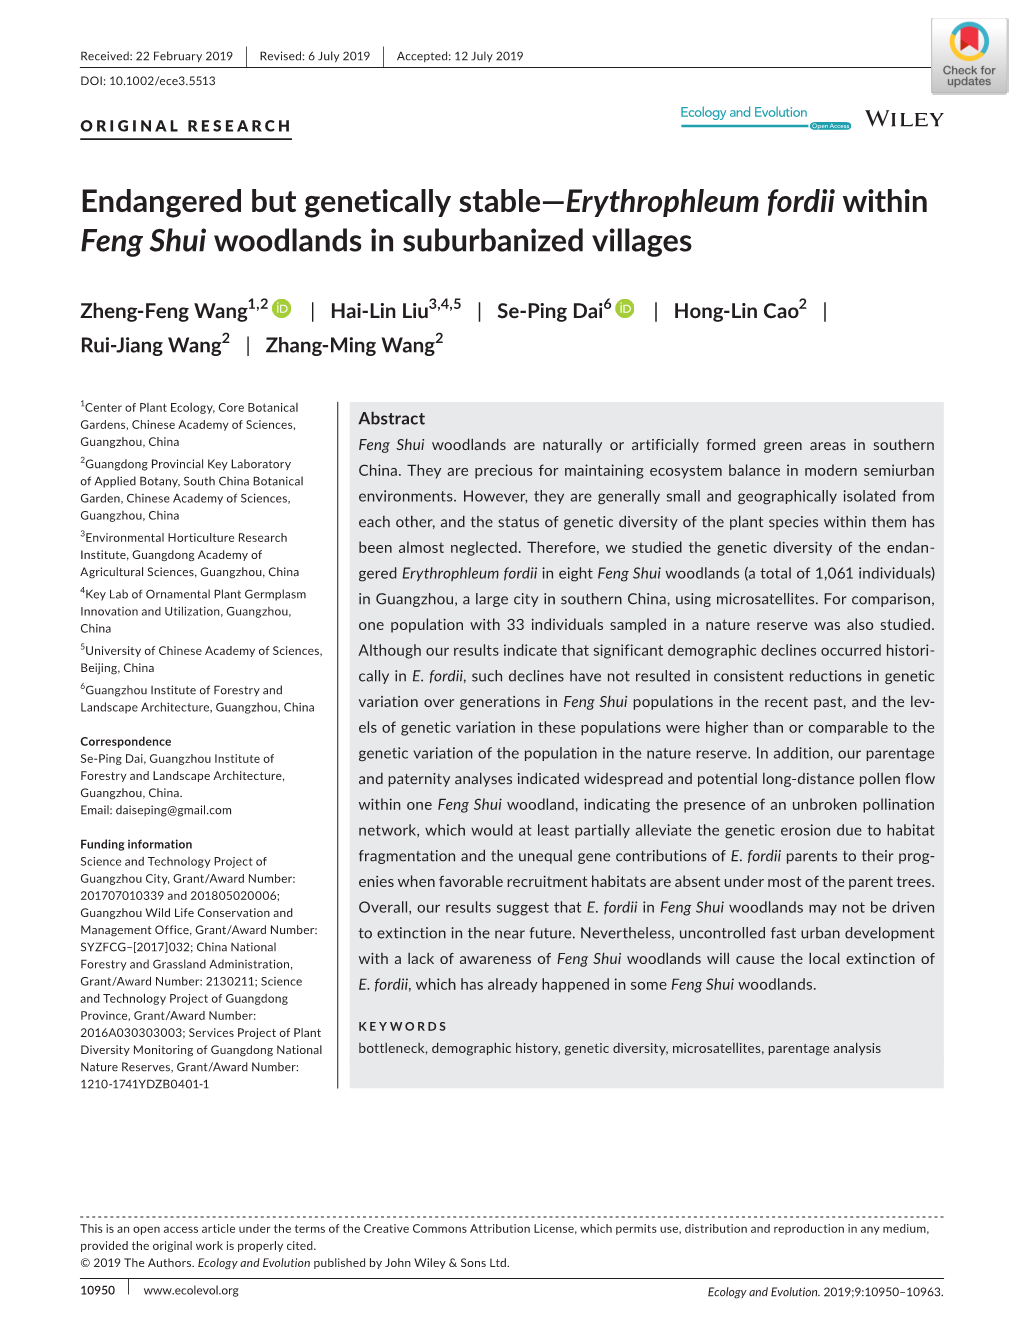 Endangered but Genetically Stable—Erythrophleum Fordii Within Feng Shui Woodlands in Suburbanized Villages